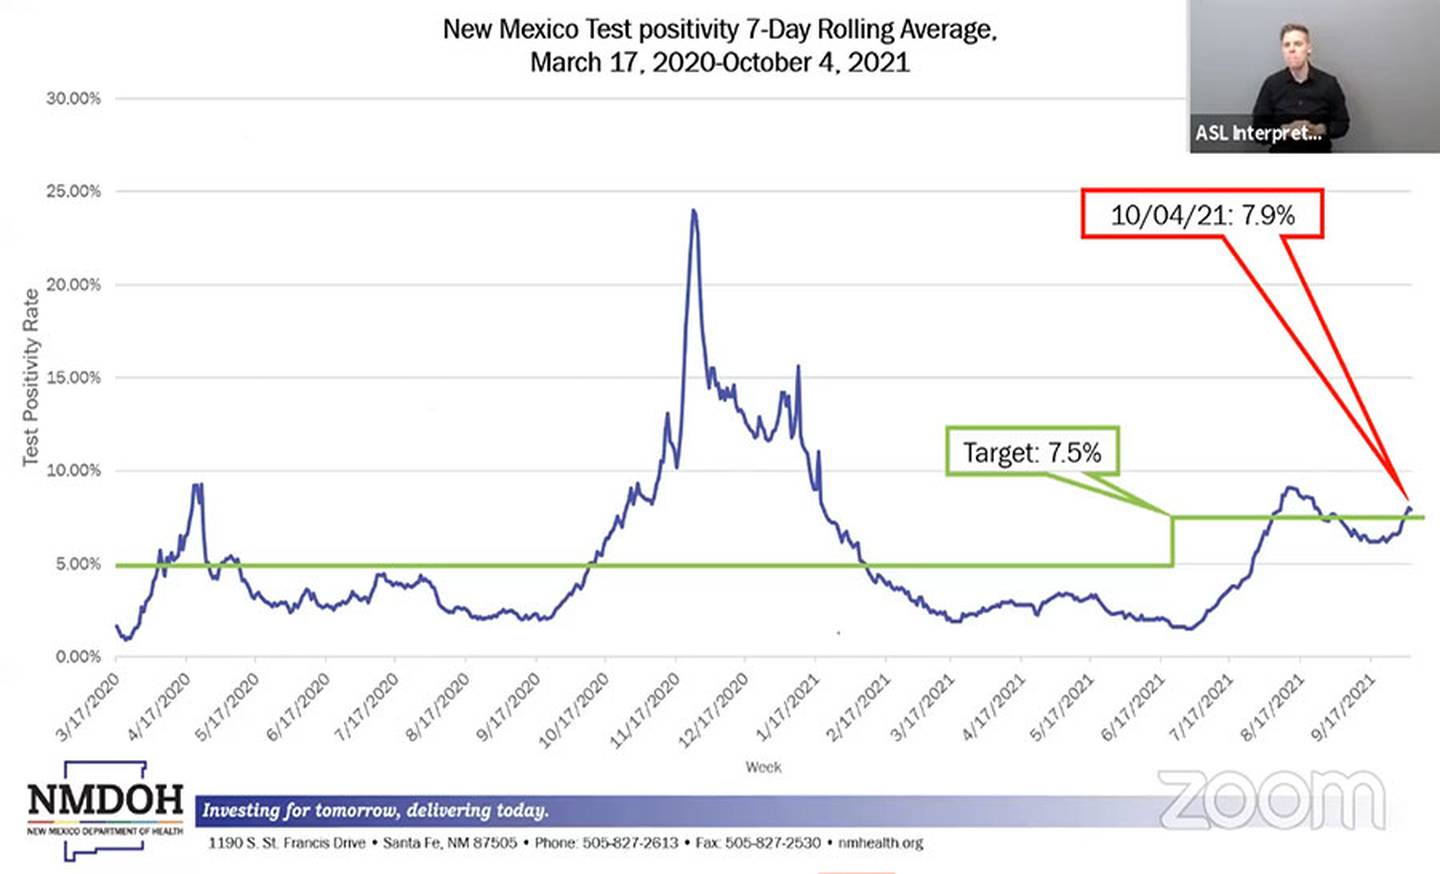 Slide, "New Mexico test positivity 7-day rolling average March 17, 2021-October 4, 2021." NMDOH, 10.6.21